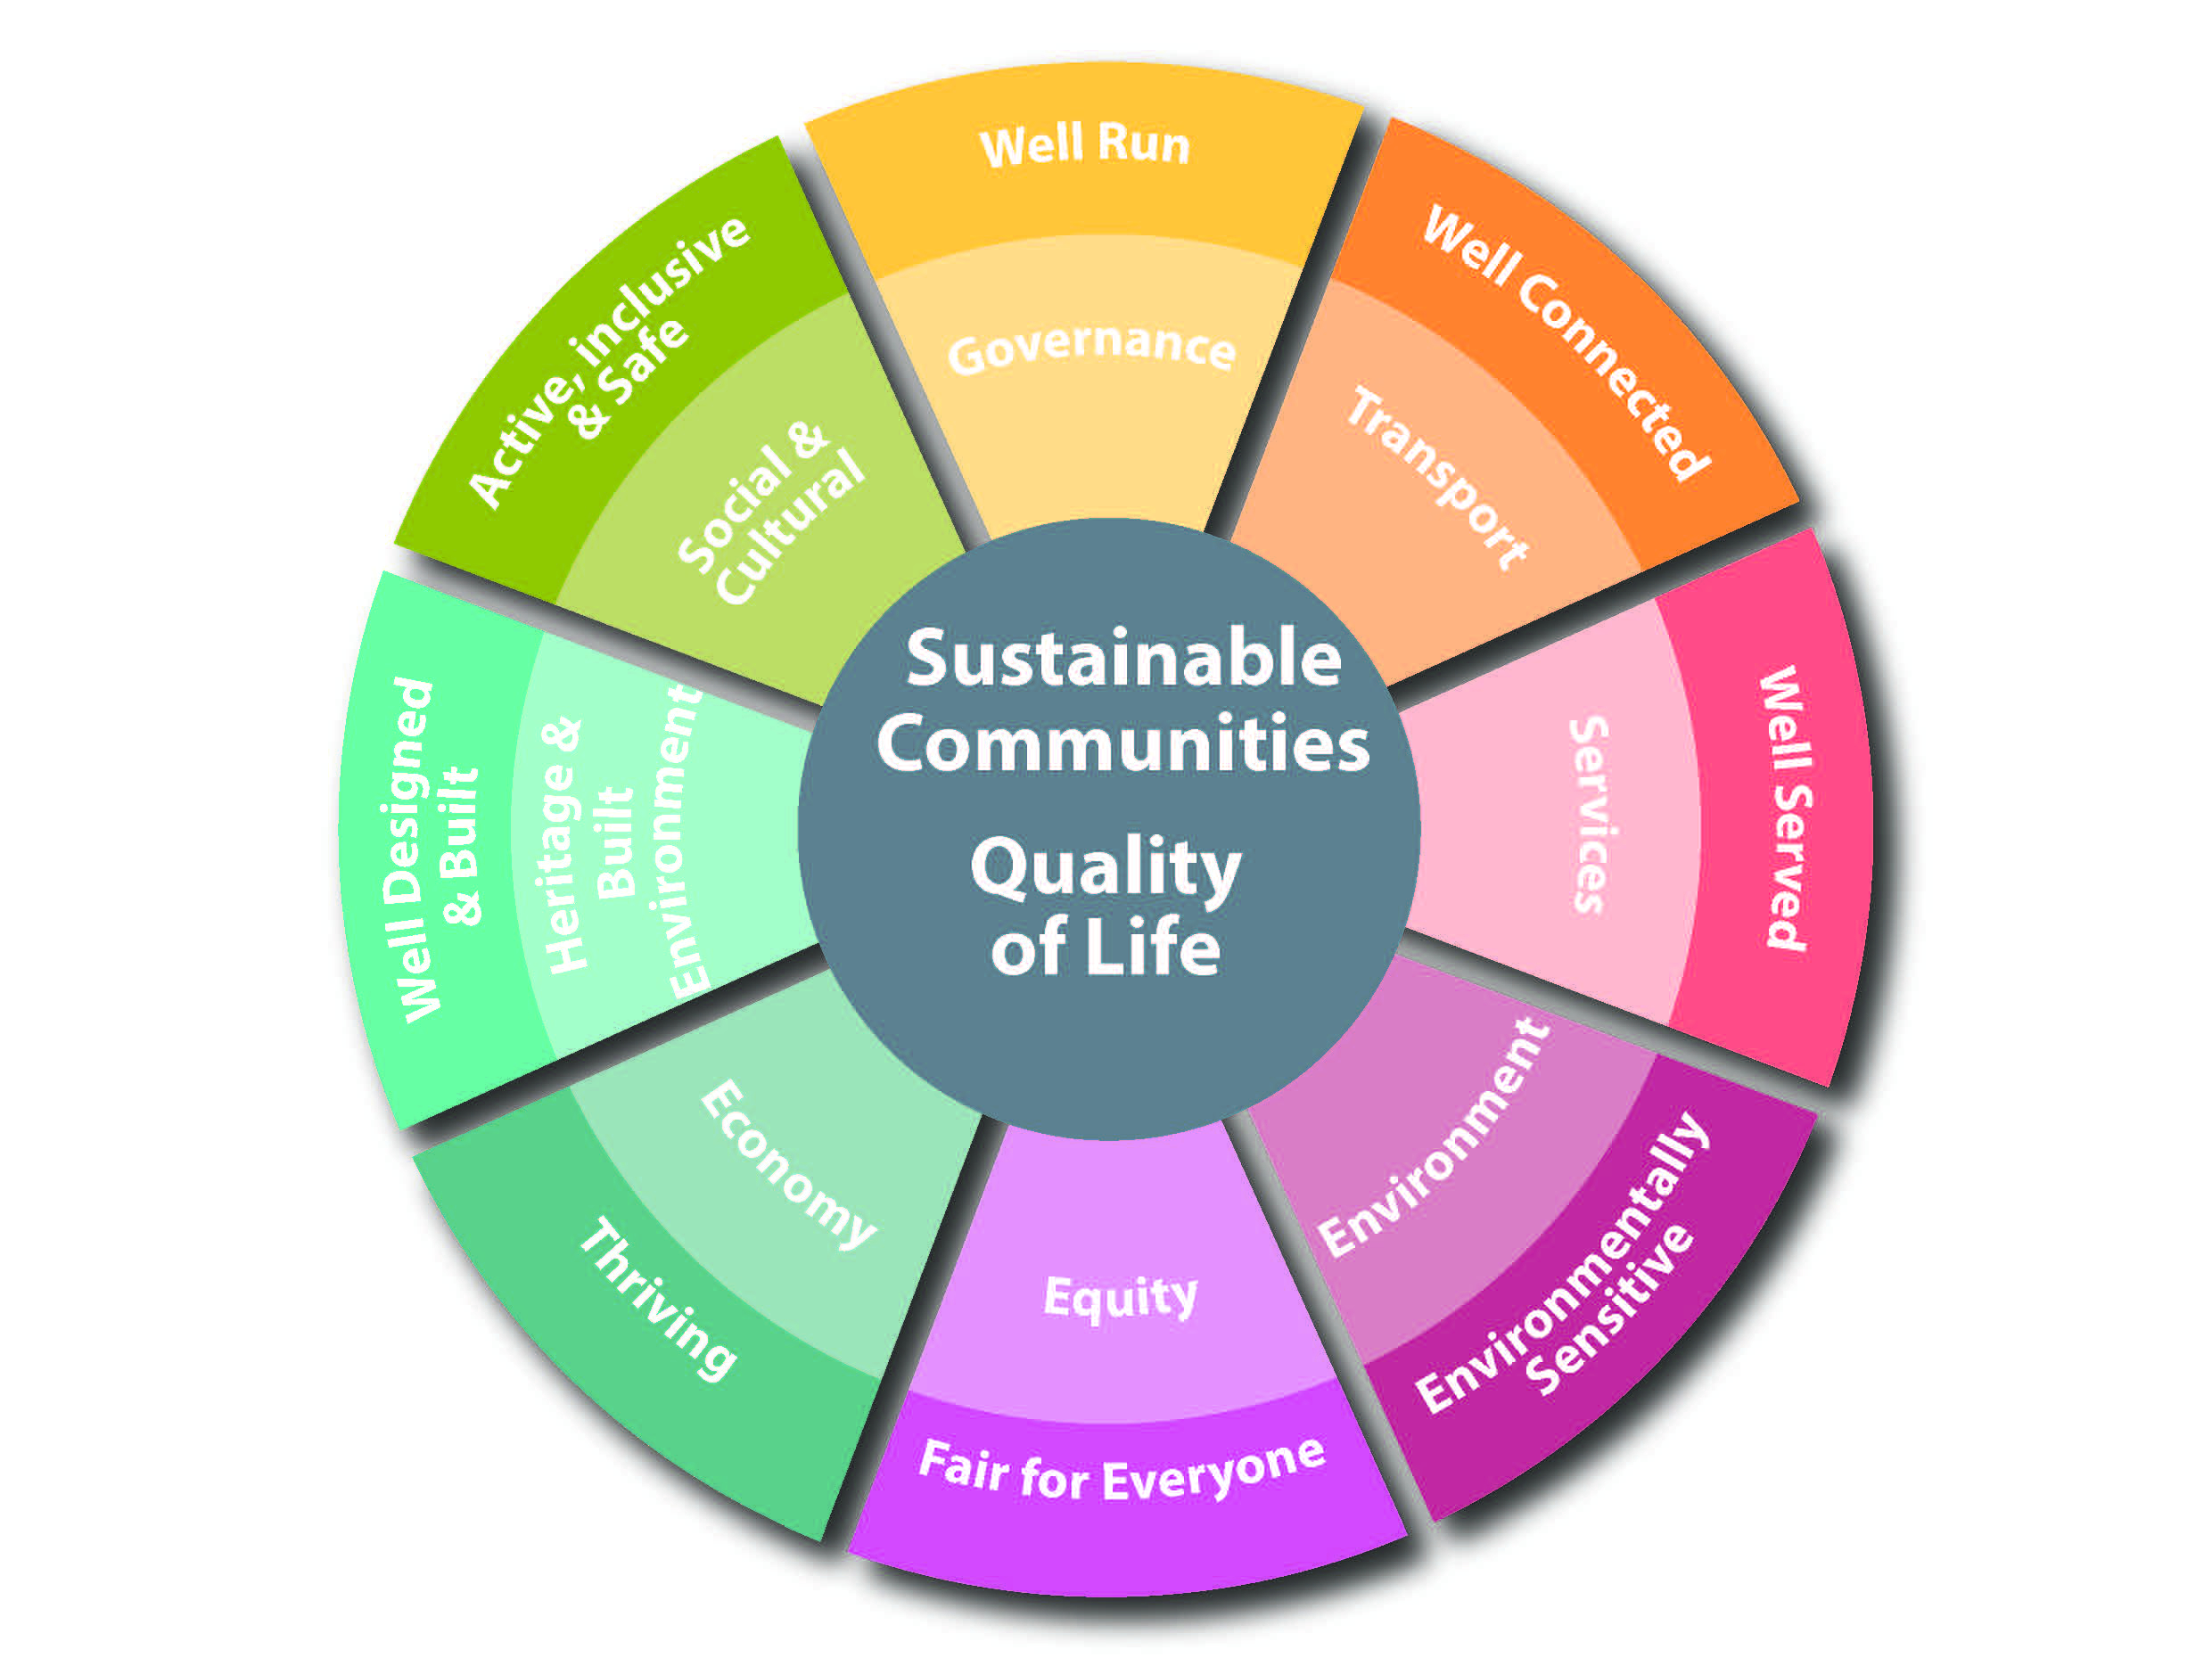 Figure 4.1: Elements of sustainability and quality of life. Source: Adapted from Egan’s wheel on sustainability and quality of life (2004)